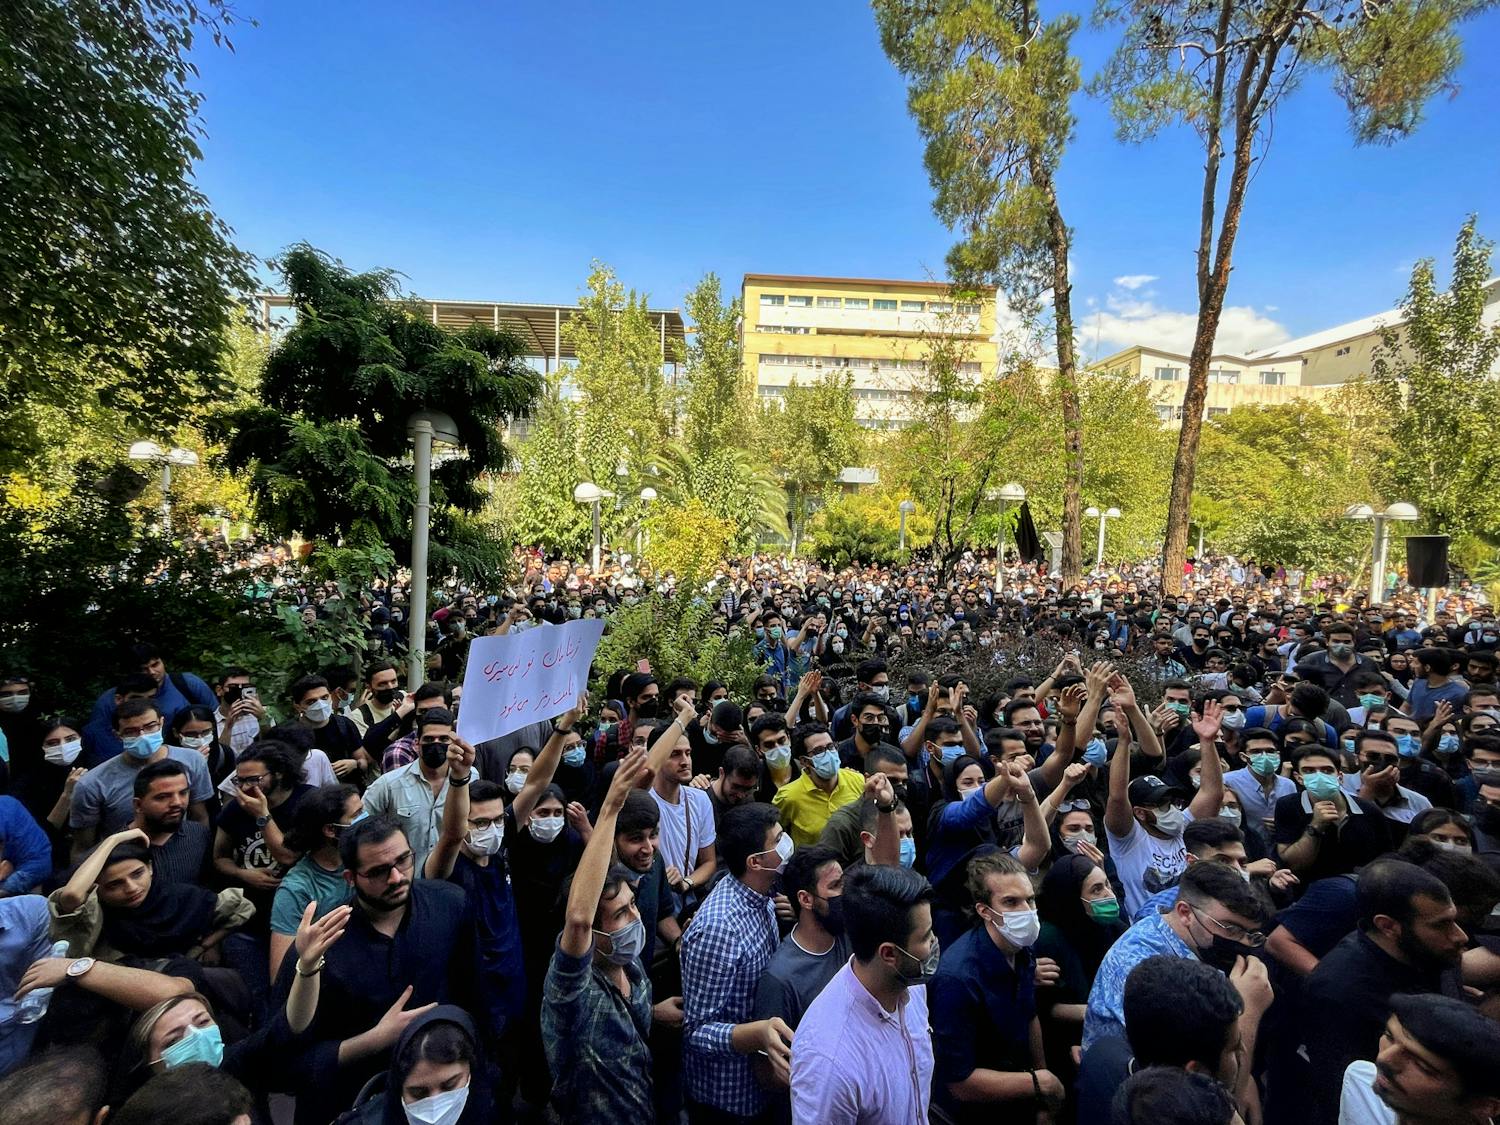 Protests have erupted across Iran in opposition to the country’s brutal authoritarian regime led by Supreme Leader Ayatollah Ali Khamenei, intensified by the killing of Mahsa Amini. (Wikimedia Commons/“Students of Amir Kabir university protest against Hijab and the Islamic Republic” by Darafsh - Own work, CC BY-SA 4.0. Sept. 20, 2022). 